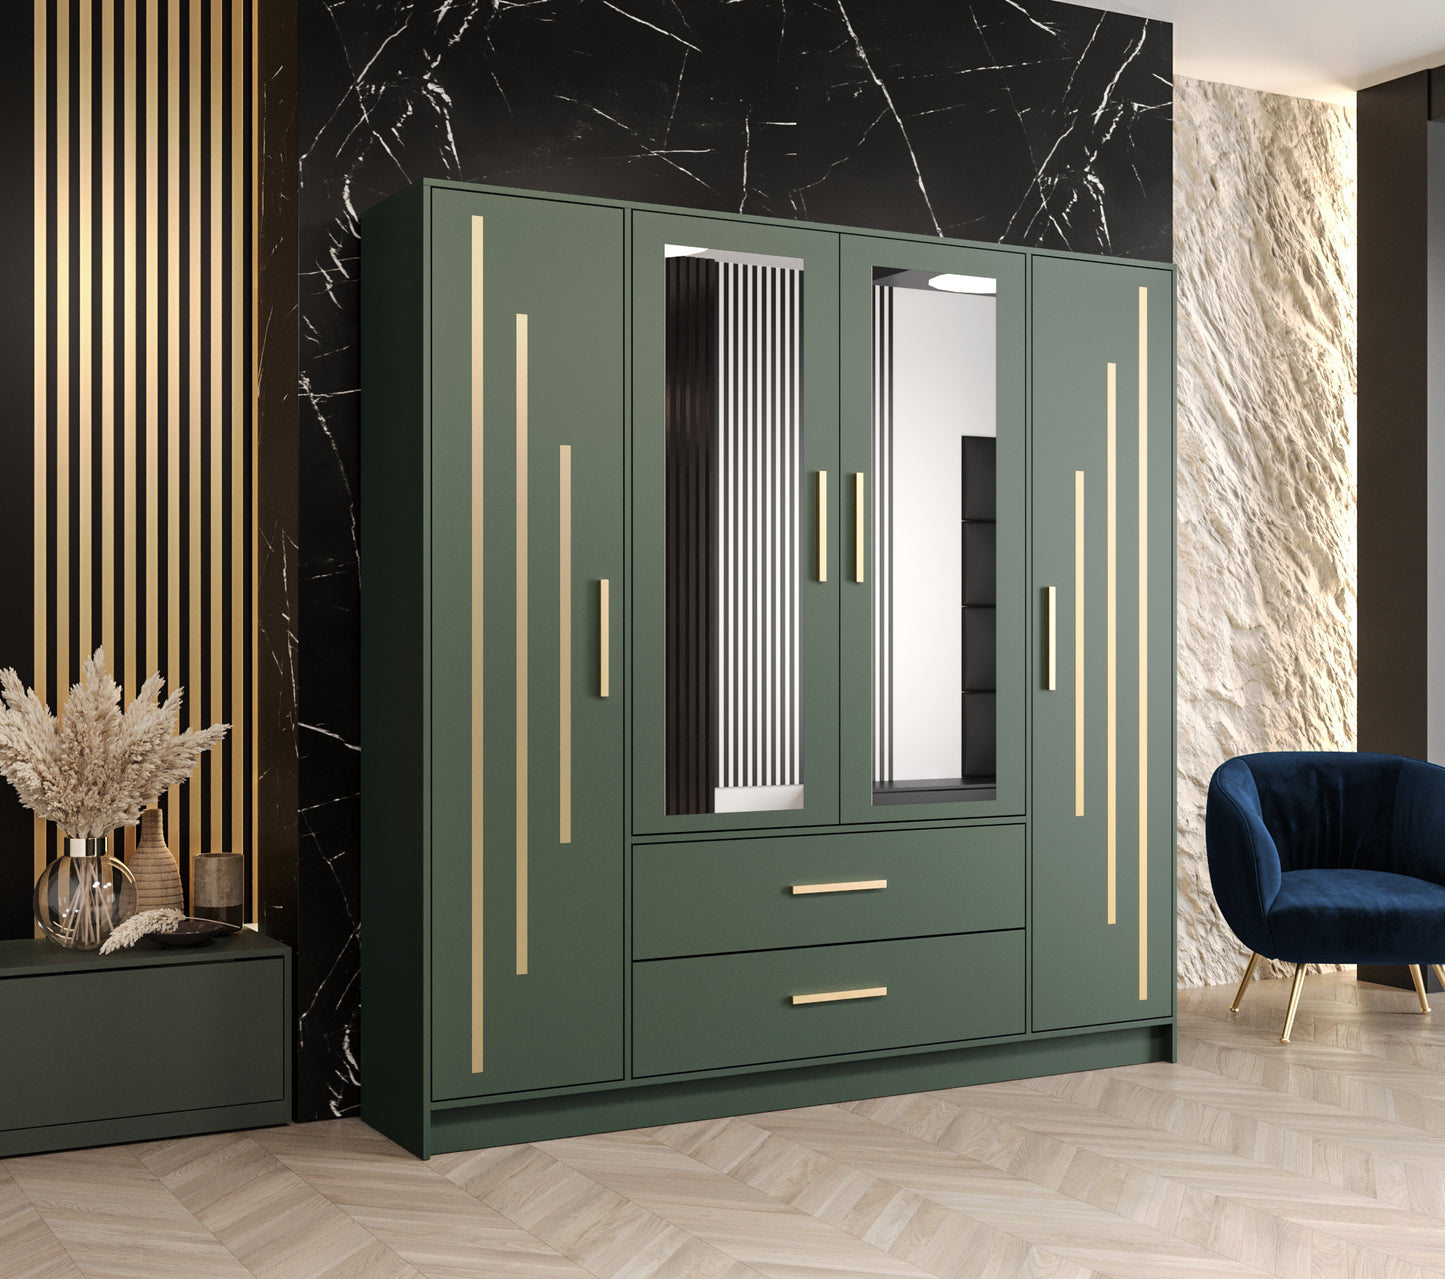 BERLINO 4  - Wardrobes With Drawers Shelves Rail Hinged Doors Mirror Green width 201 cm FAST DELIVERY